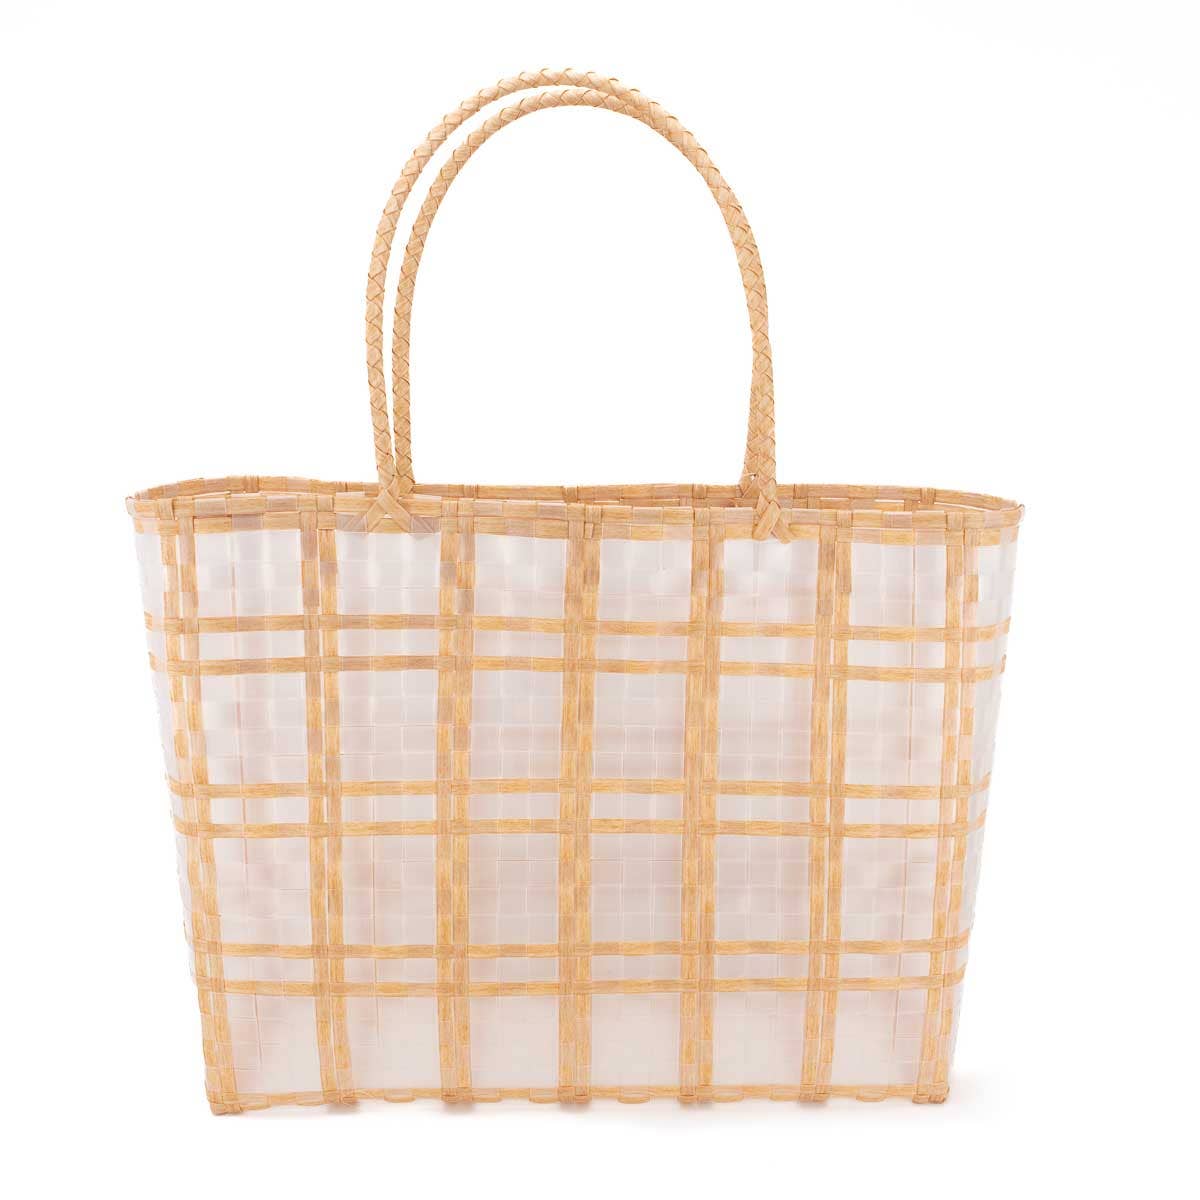 The Royal Standard - Keone Woven Beach Tote